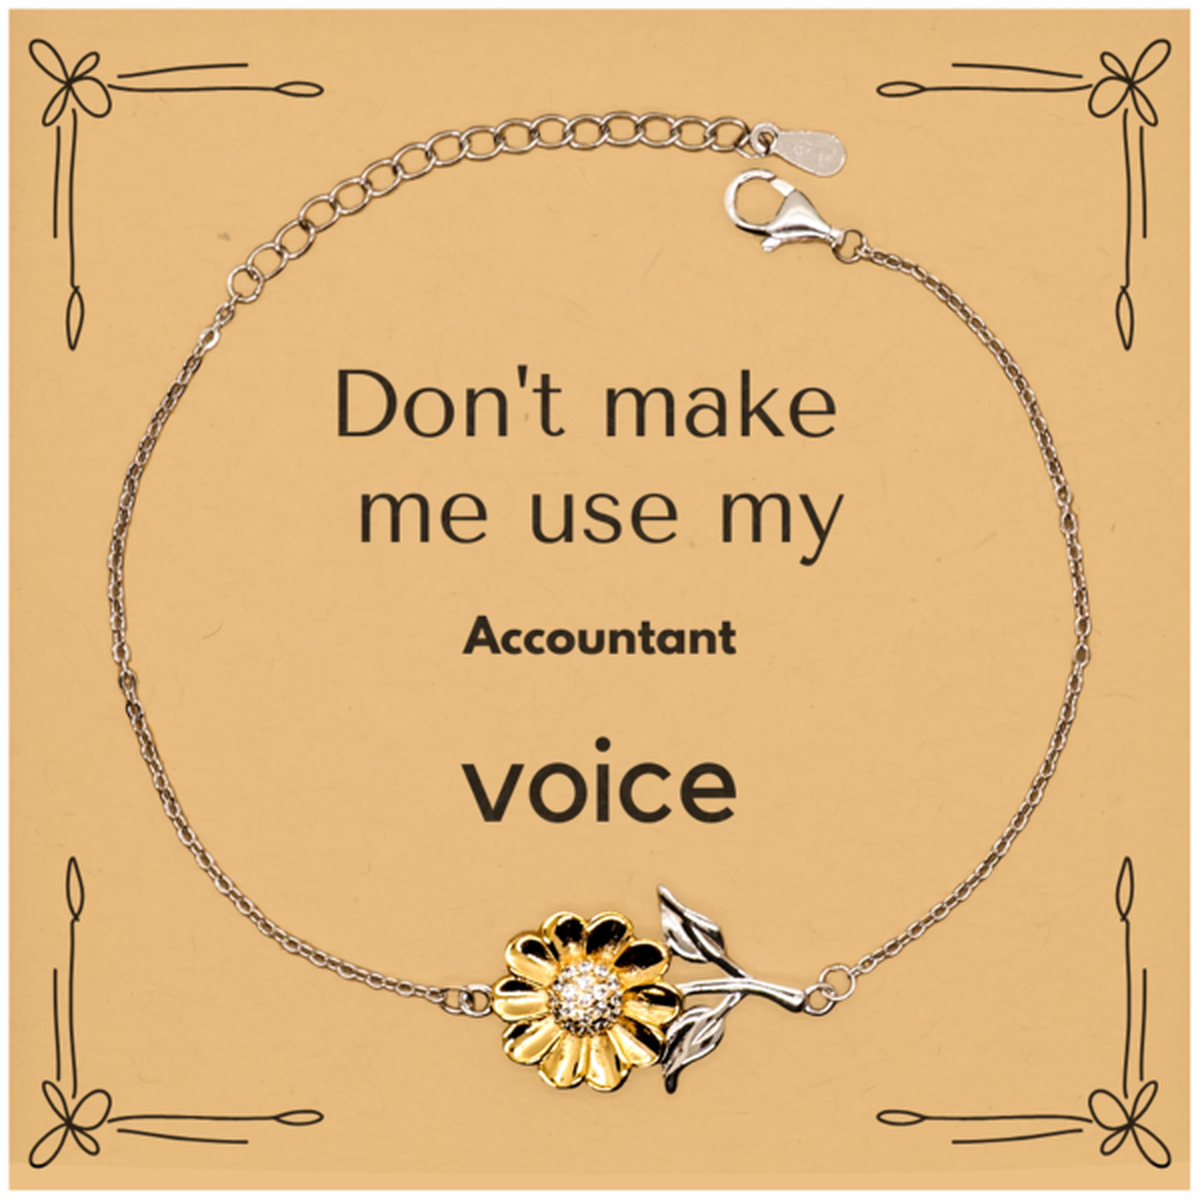 Don't make me use my Accountant voice, Sarcasm Accountant Card Gifts, Christmas Accountant Sunflower Bracelet Birthday Unique Gifts For Accountant Coworkers, Men, Women, Colleague, Friends